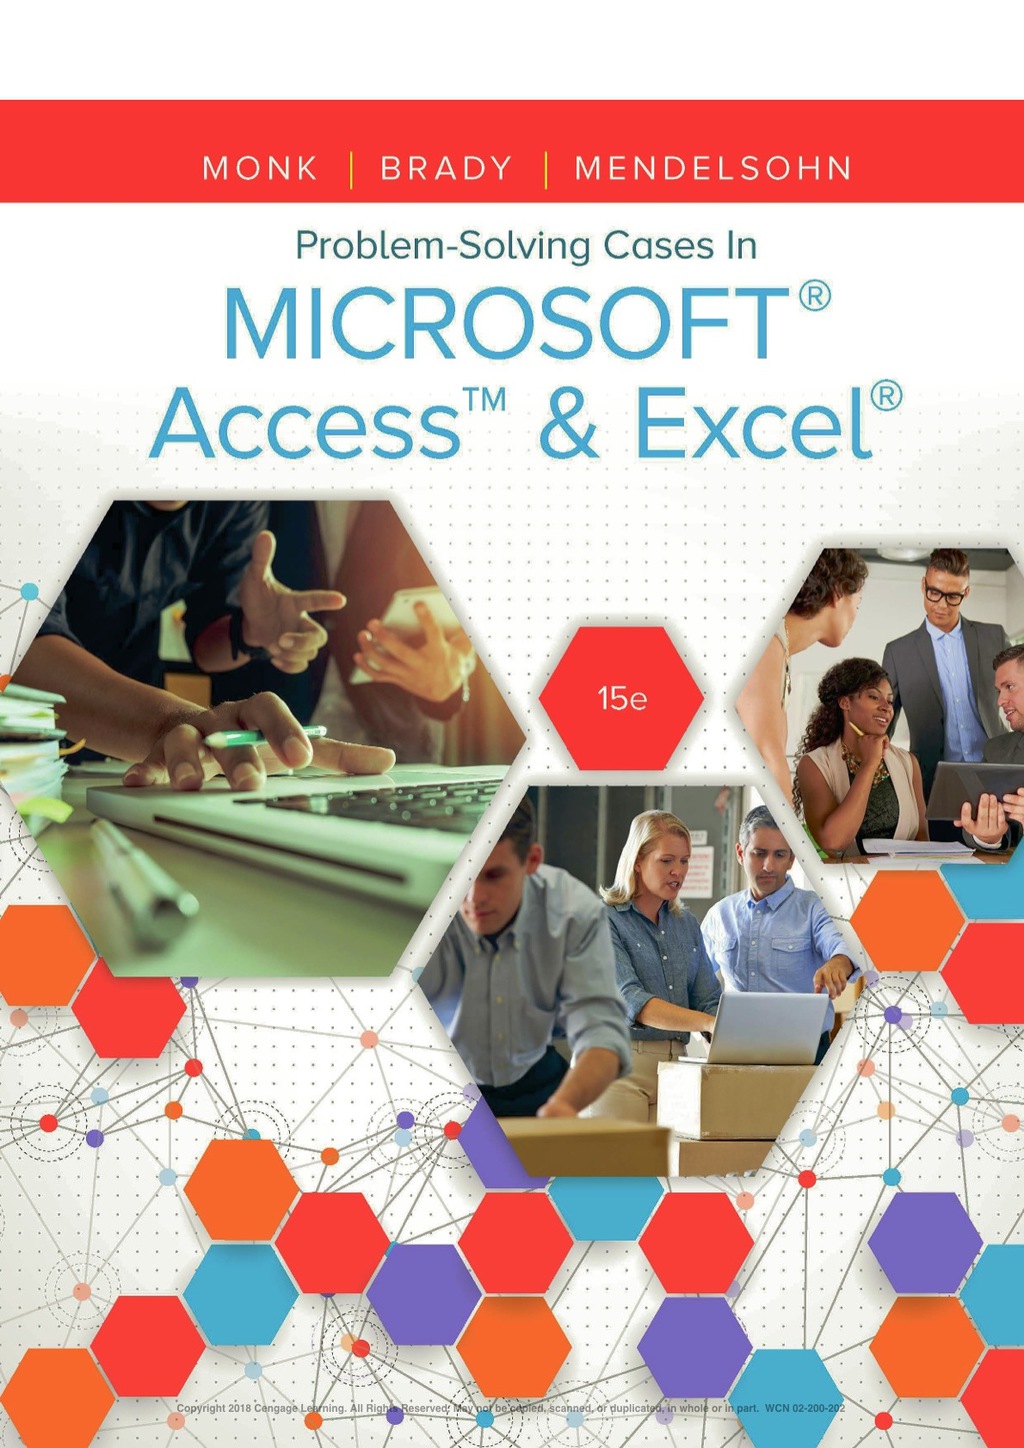 Problem Solving Cases In Microsoft Access & Excel - 15th Edition (eBook Rental)